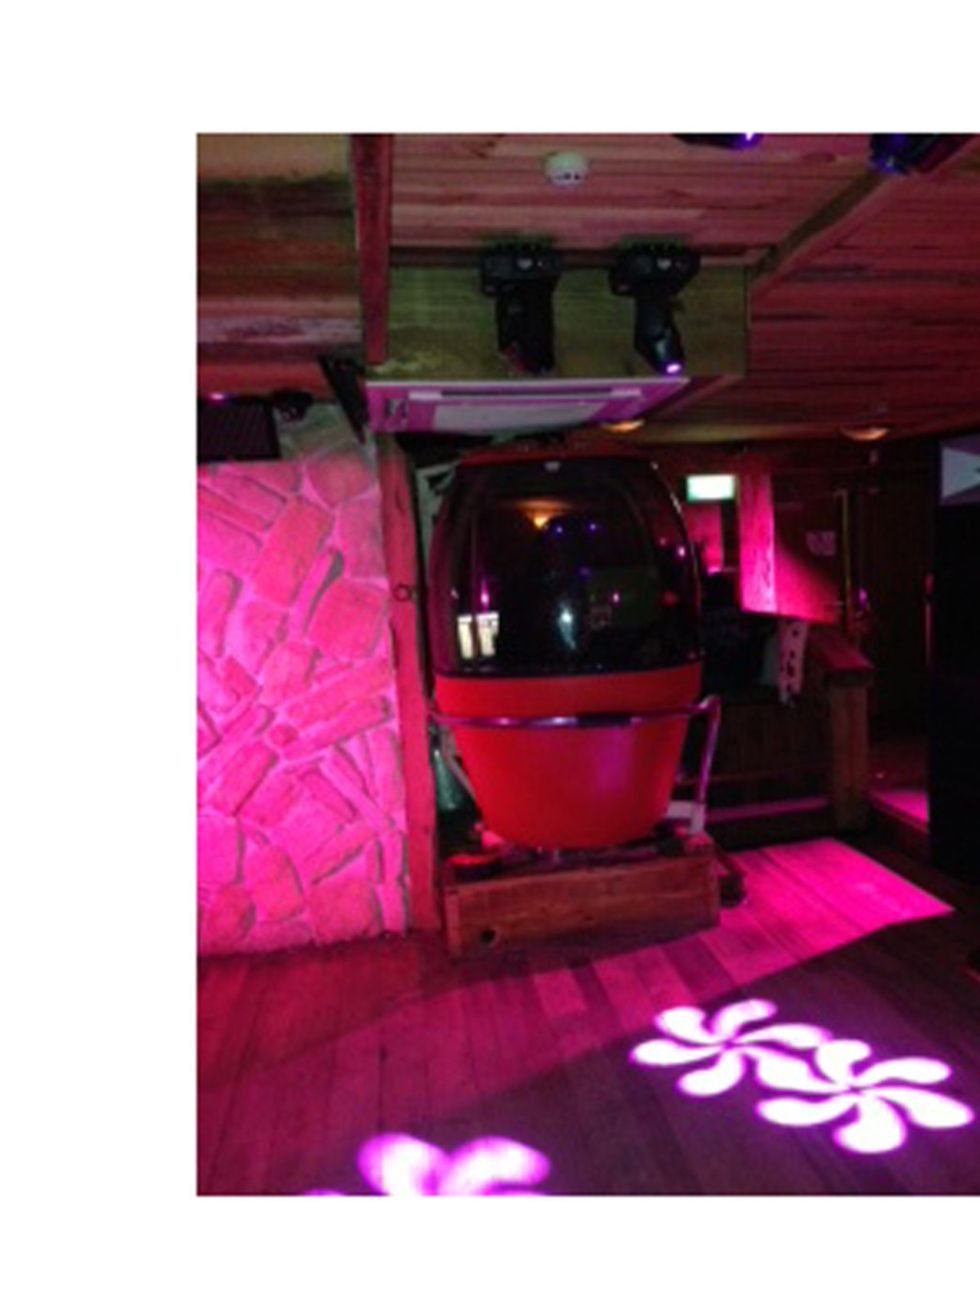 <p>At the end of a long but exciting day we headed to the Sophia Webster after-party at Bodo's Schloss. The ski lodge-style bar complete with ski lift DJ booth was snug and cosy - just what we needed after enduring the days freezing temperatures</p>